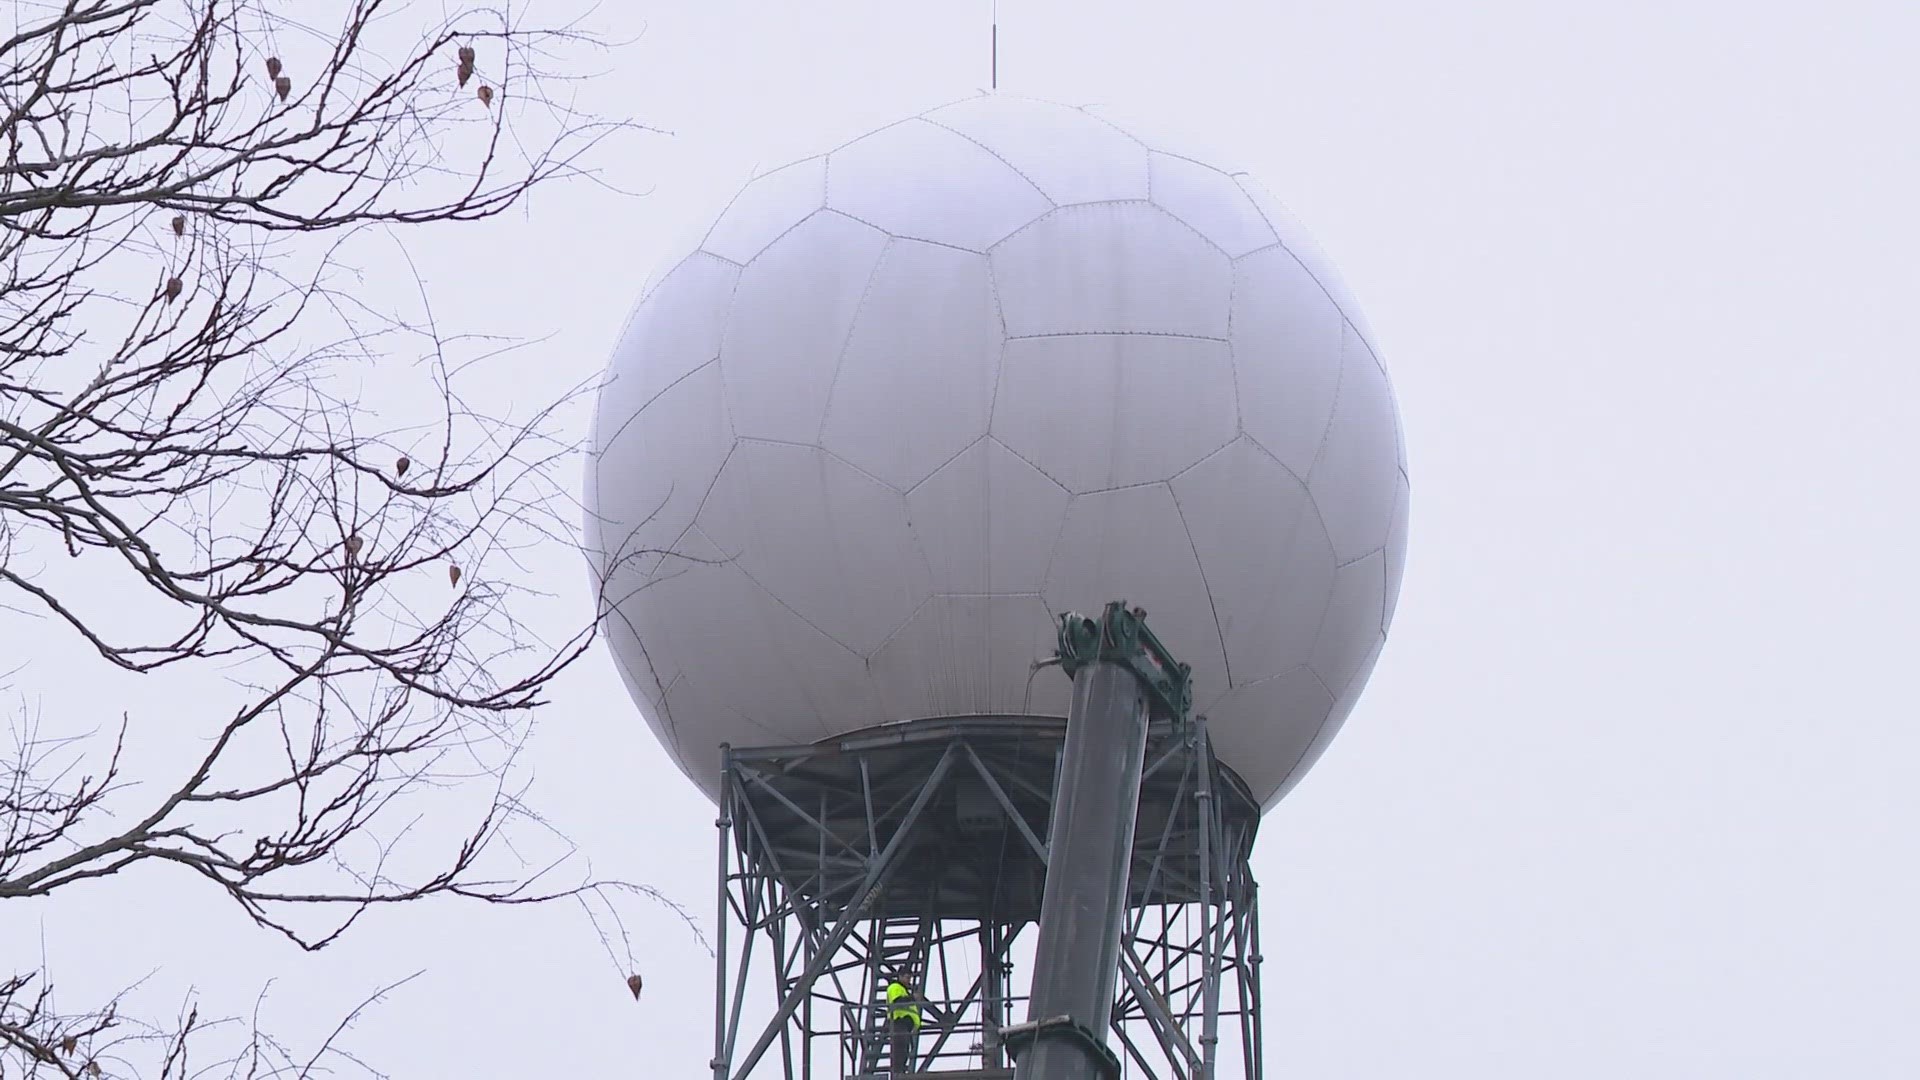 In a push to significantly improve weather forecasting and safety, the National Weather Service (NWS) in St. Louis. It is undergoing a crucial upgrade.